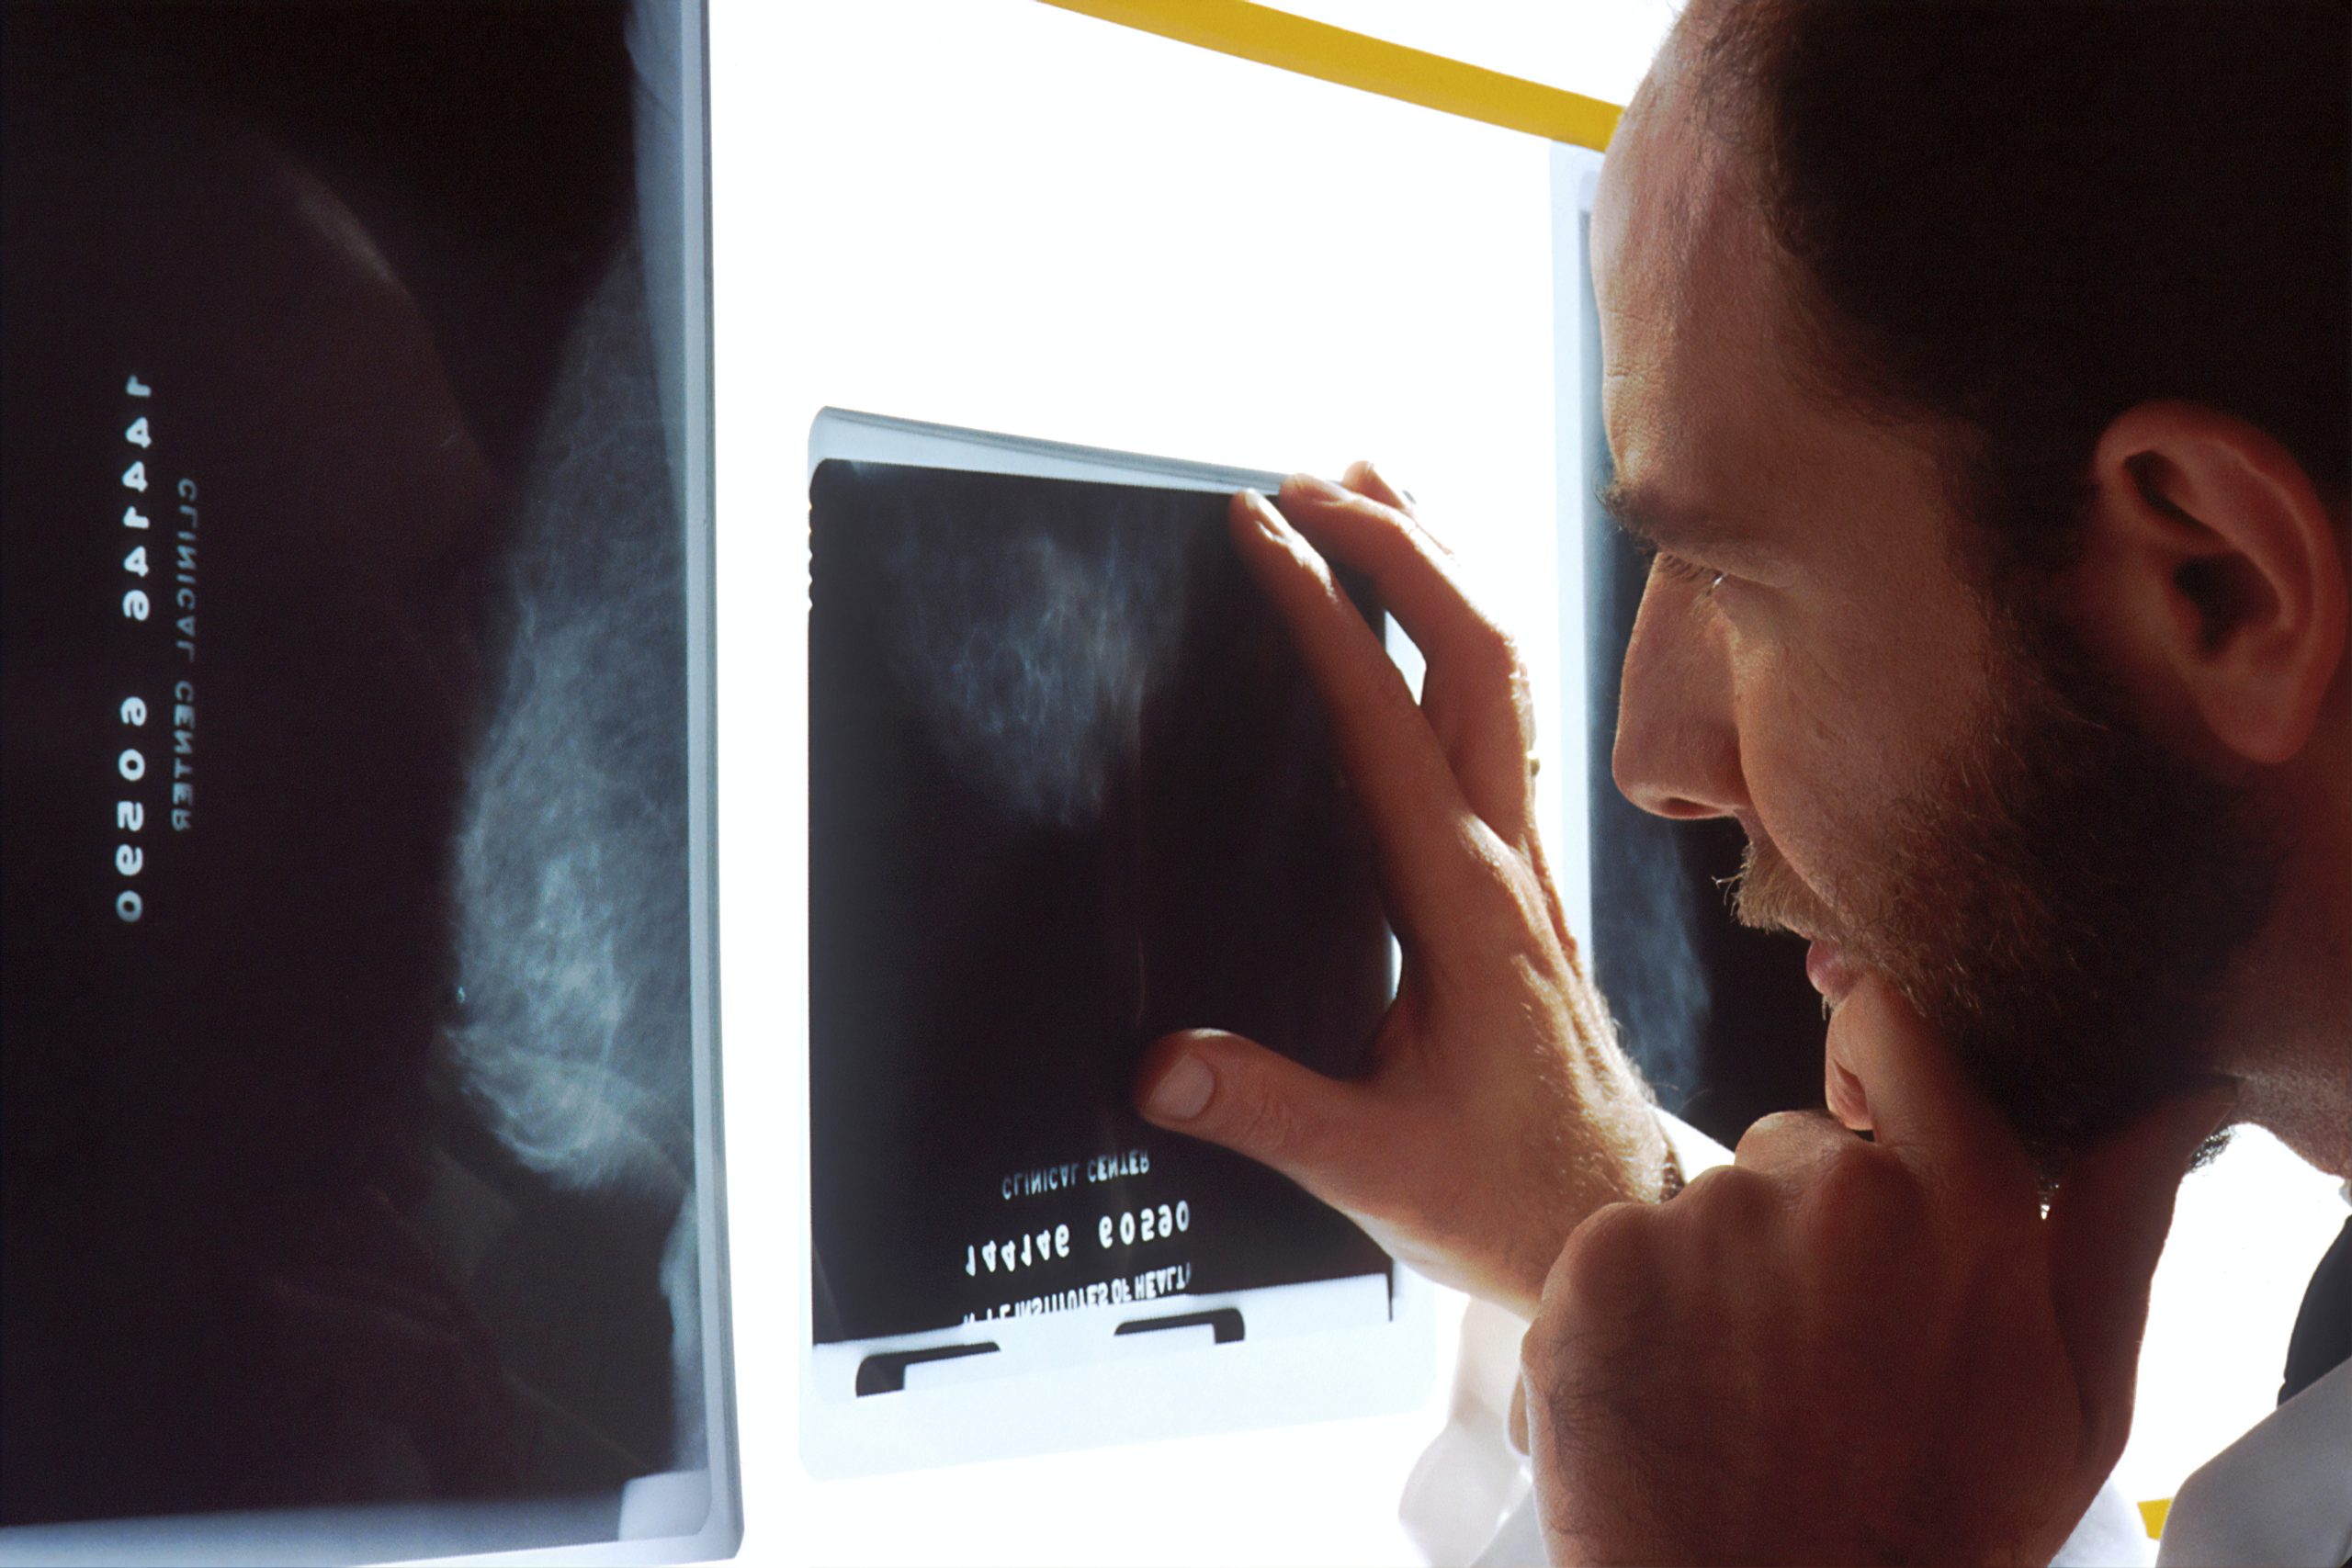 A doctor examines mammograms on a view box.